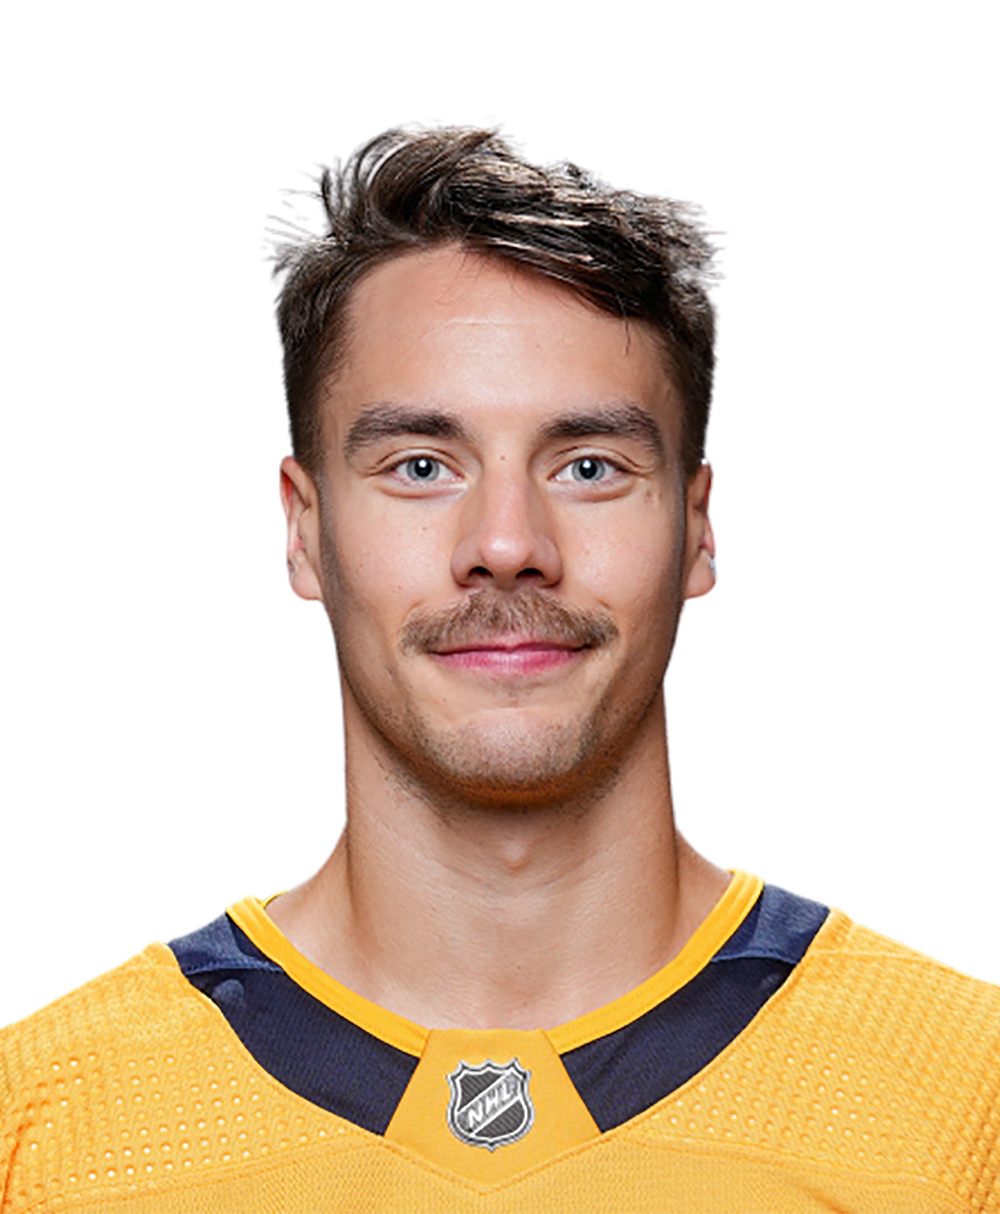 Juuse Saros' net worth, age, NHL ranking, wife, current team, house, cars,  stats, contract